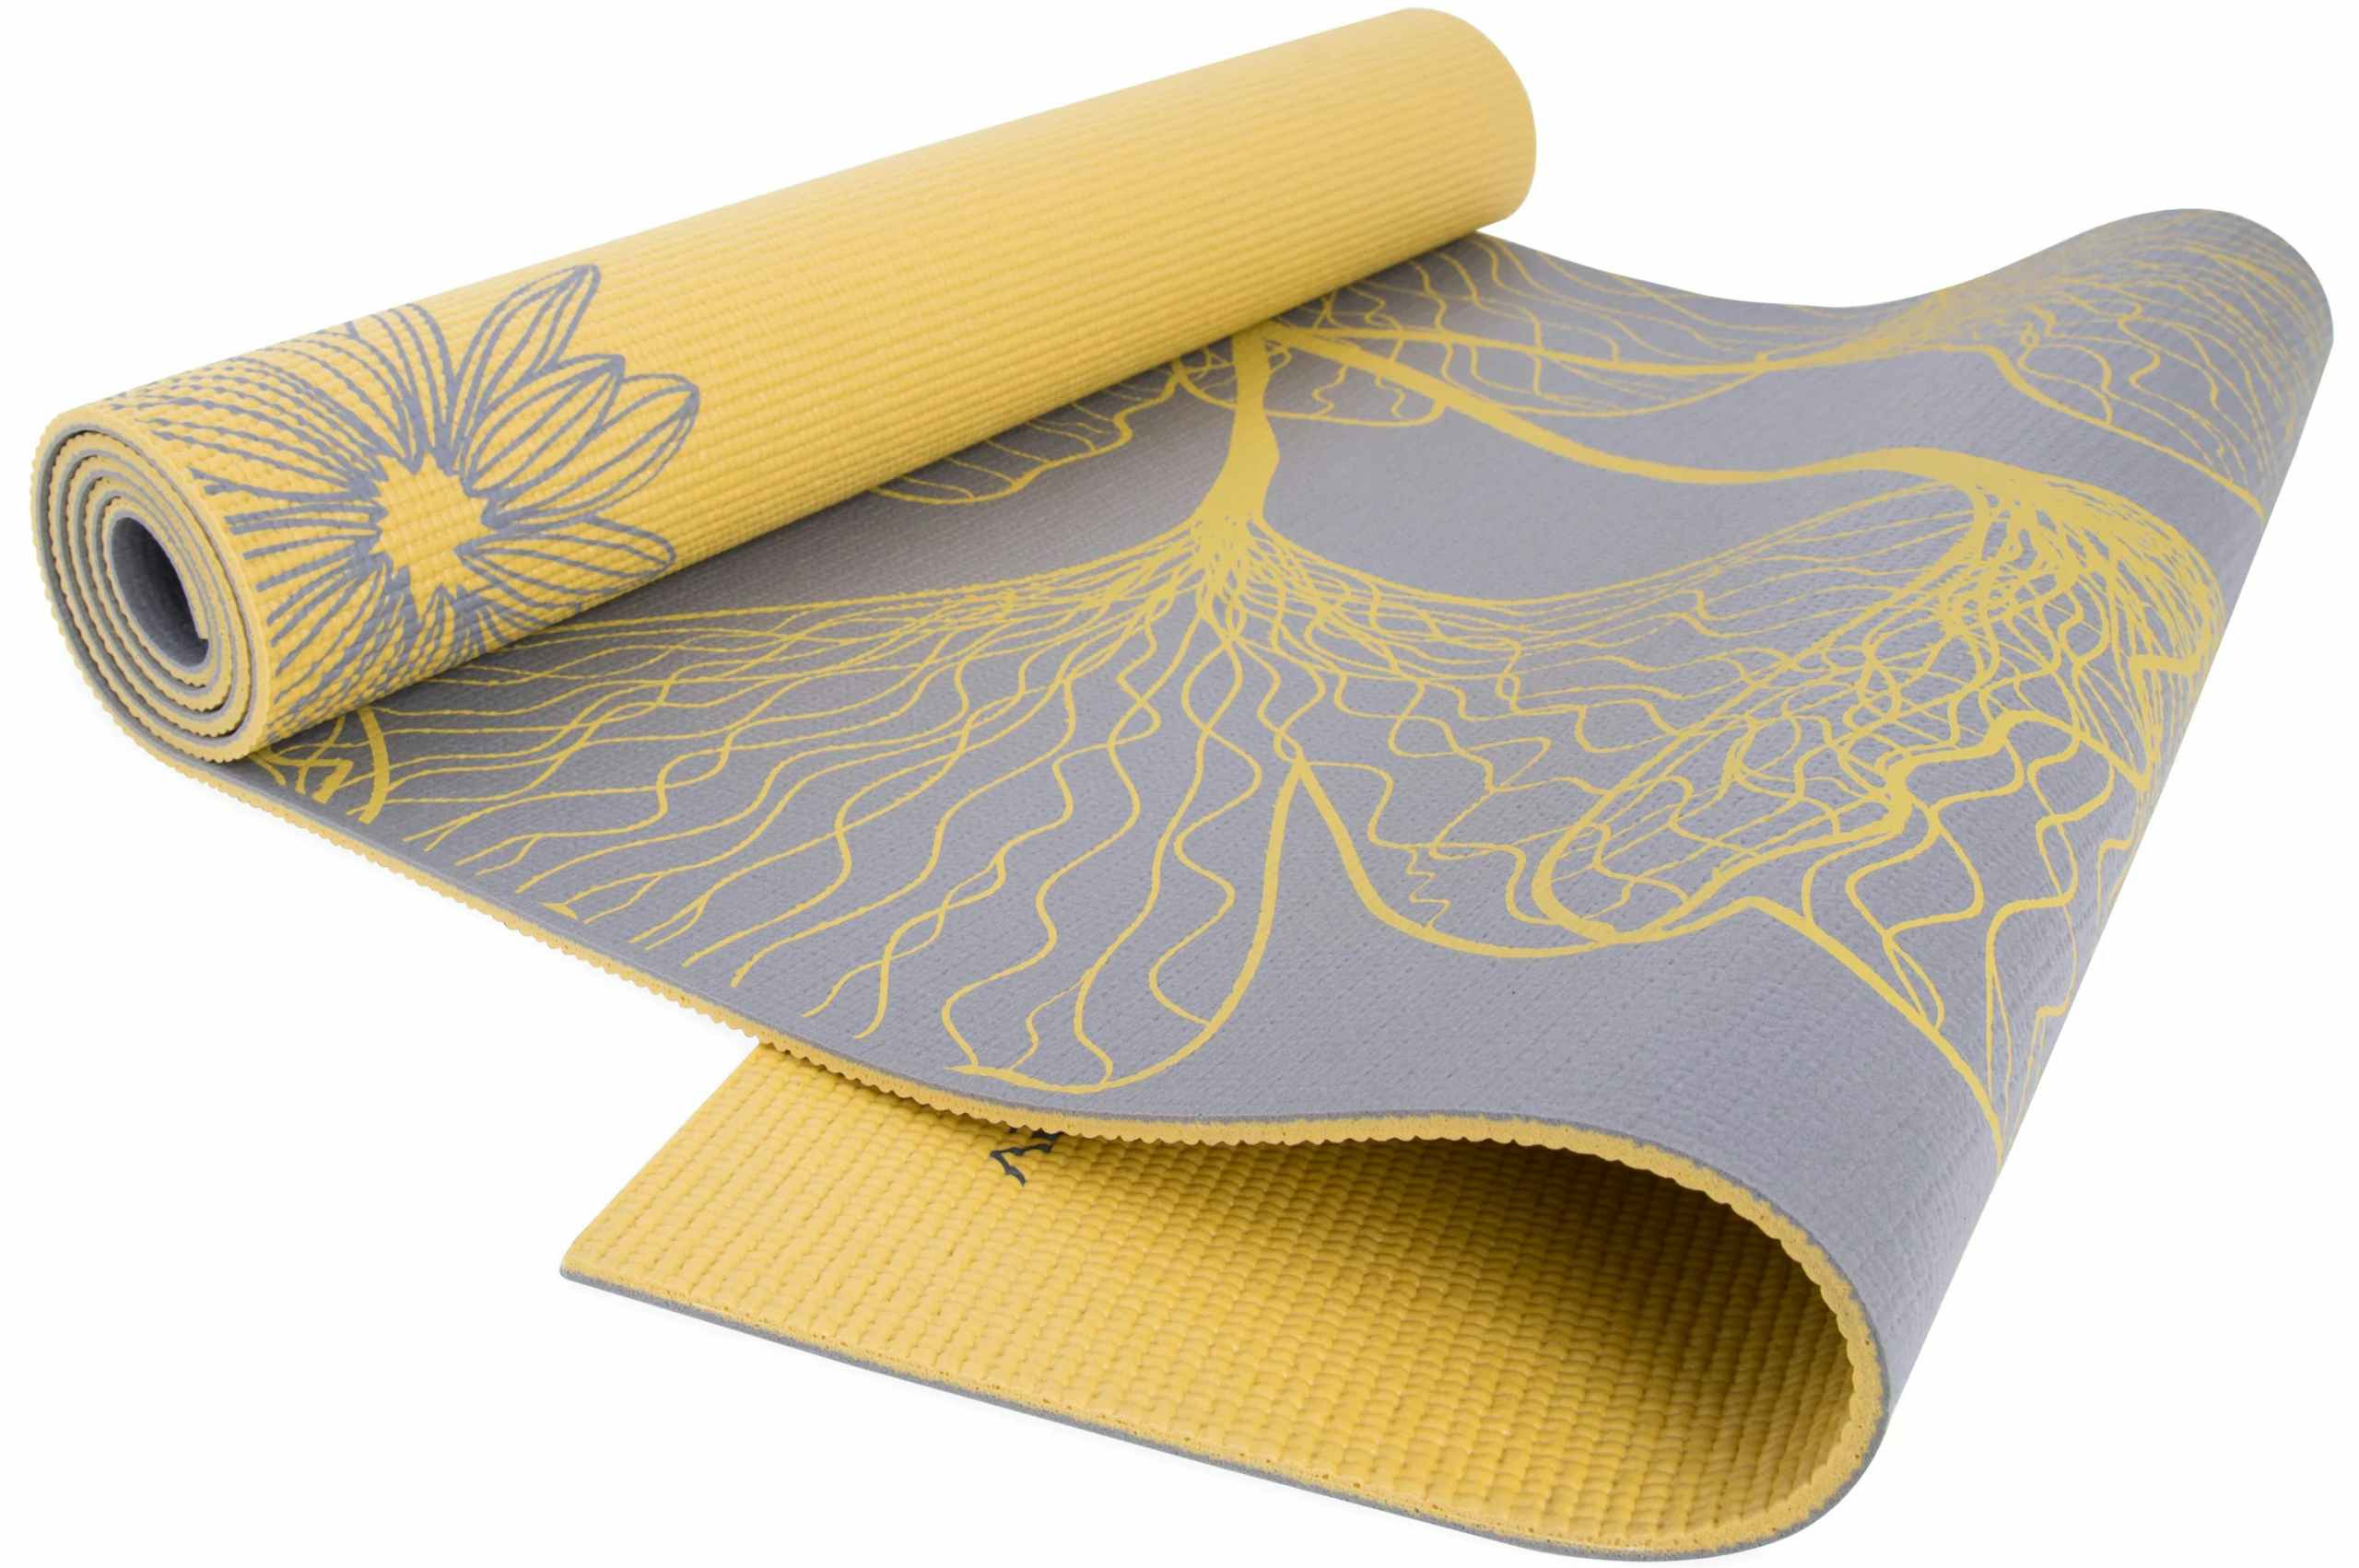 secret santa gifts - a yellow and grey reversible yoga mat with flower patterns